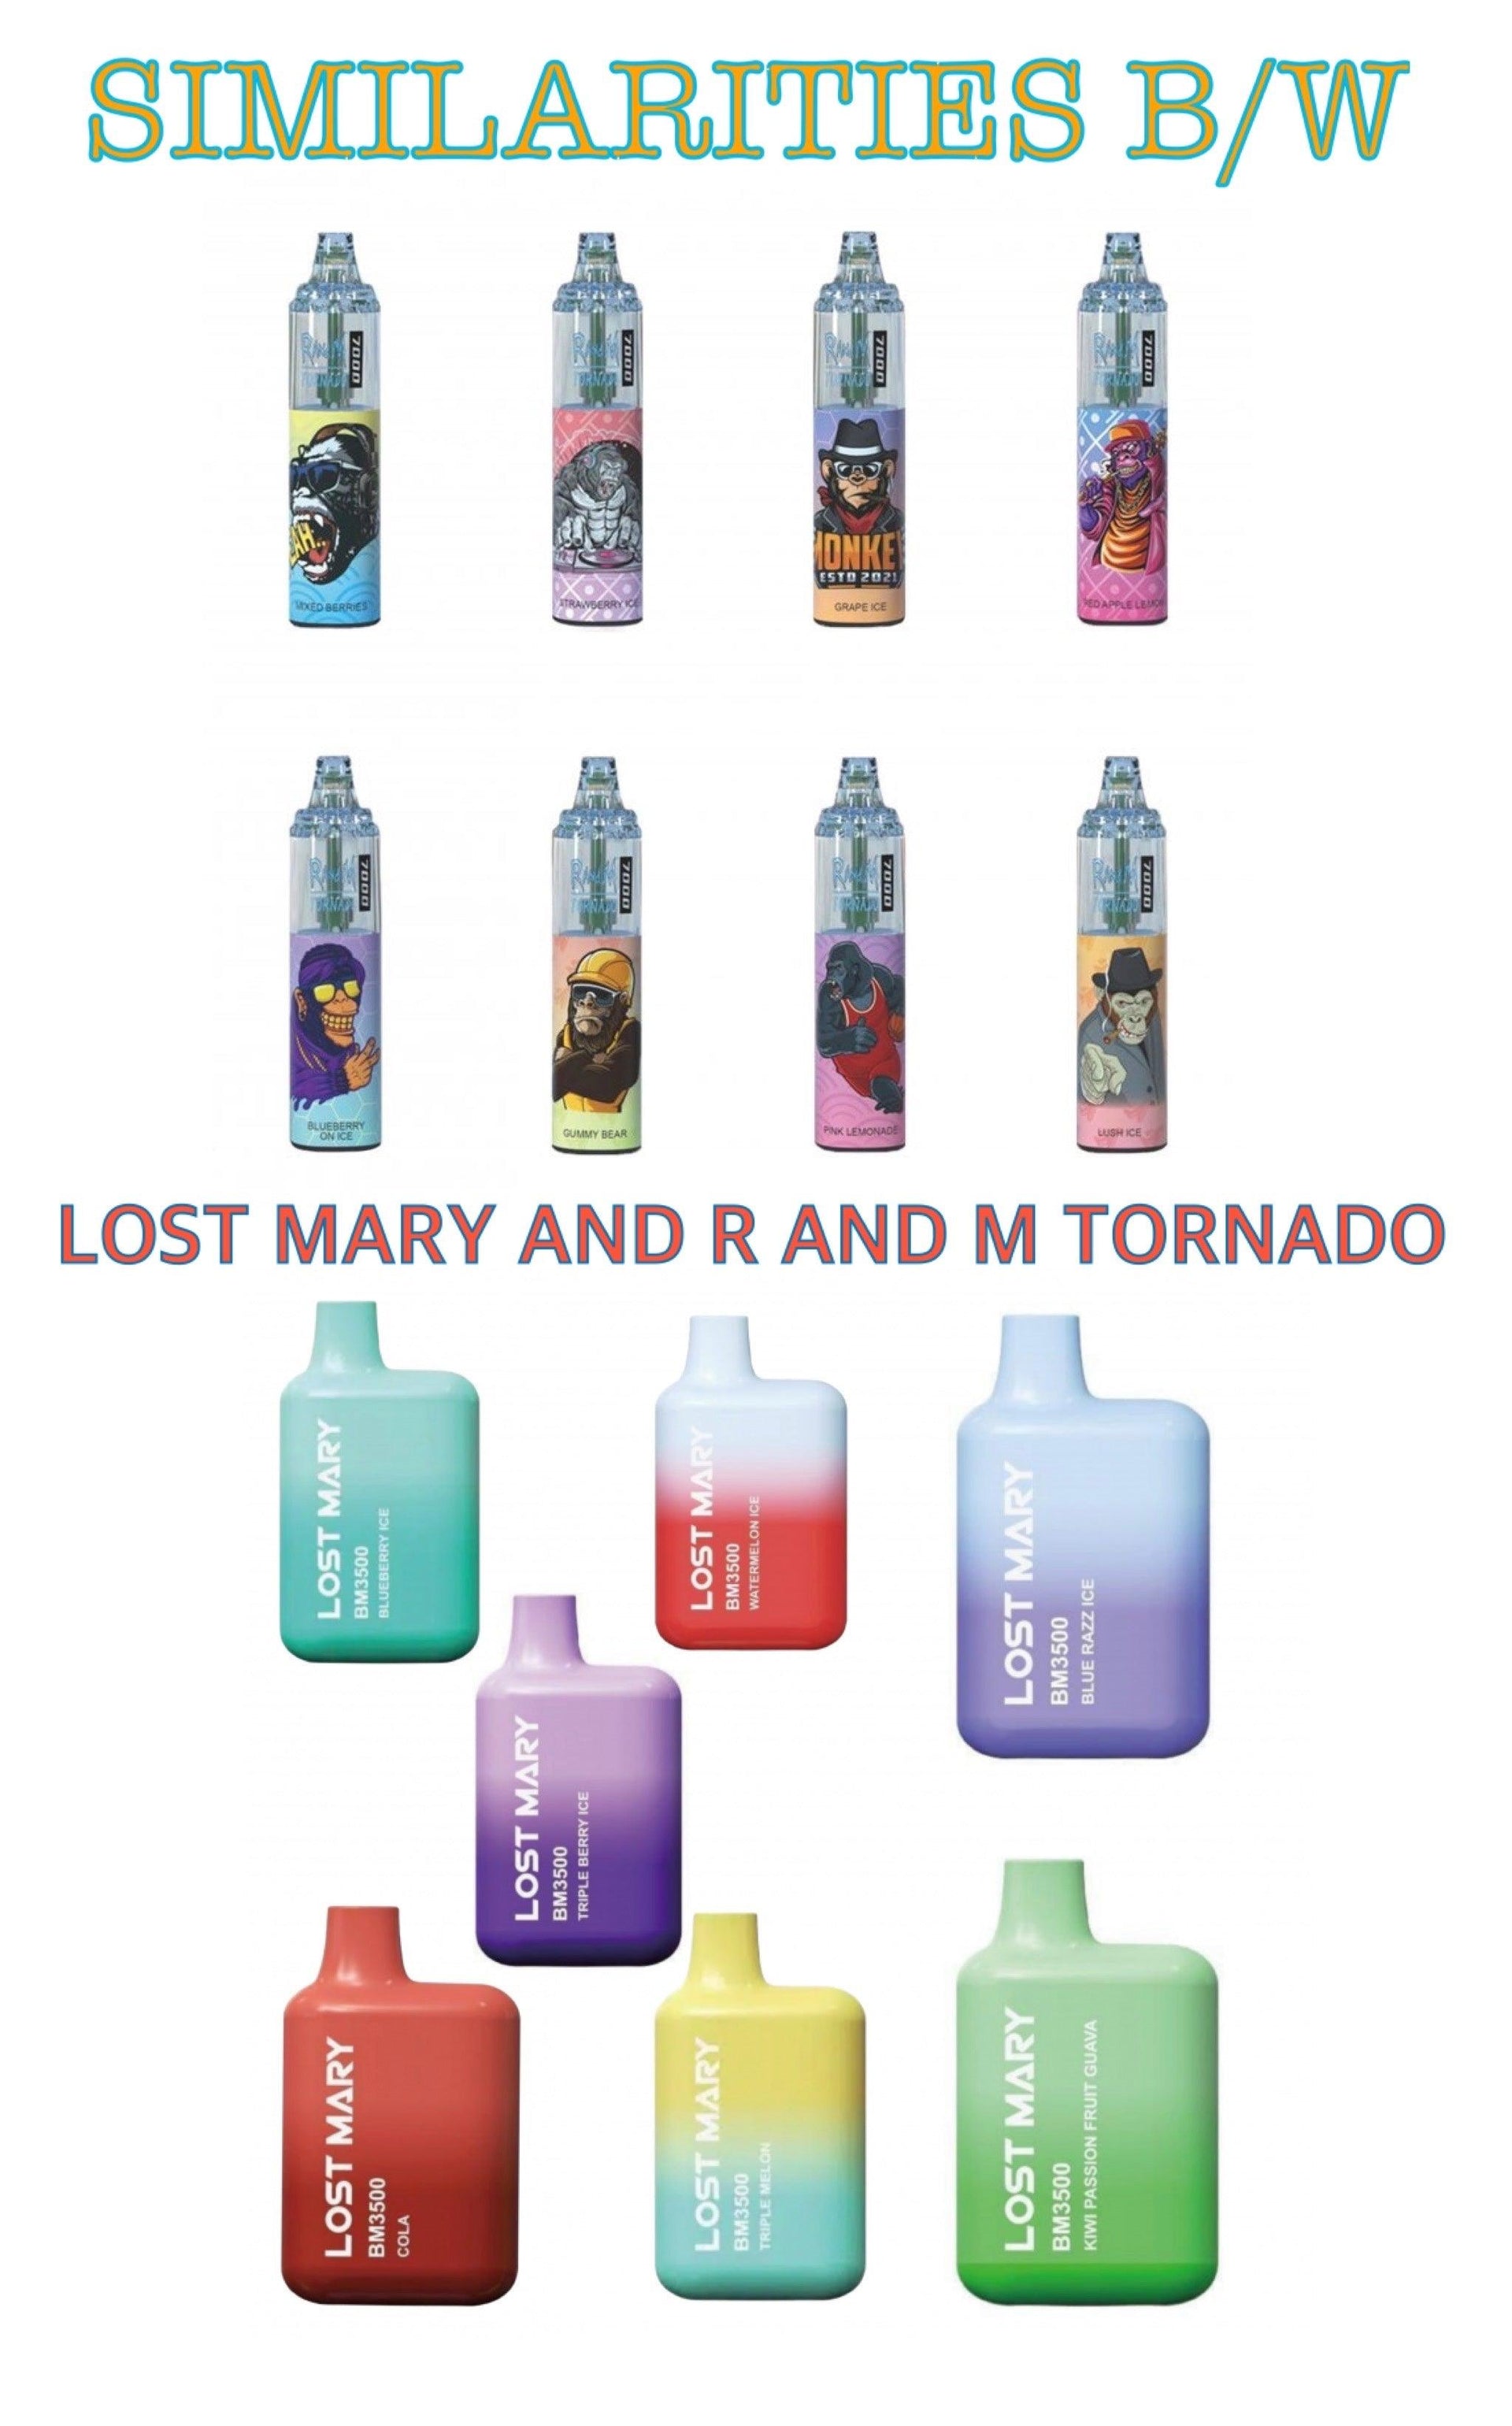 image shows text(similarities b/w-lost mary R AND M TORNADO) with 8 LOST MARY bars and 8 R AND M BARS.